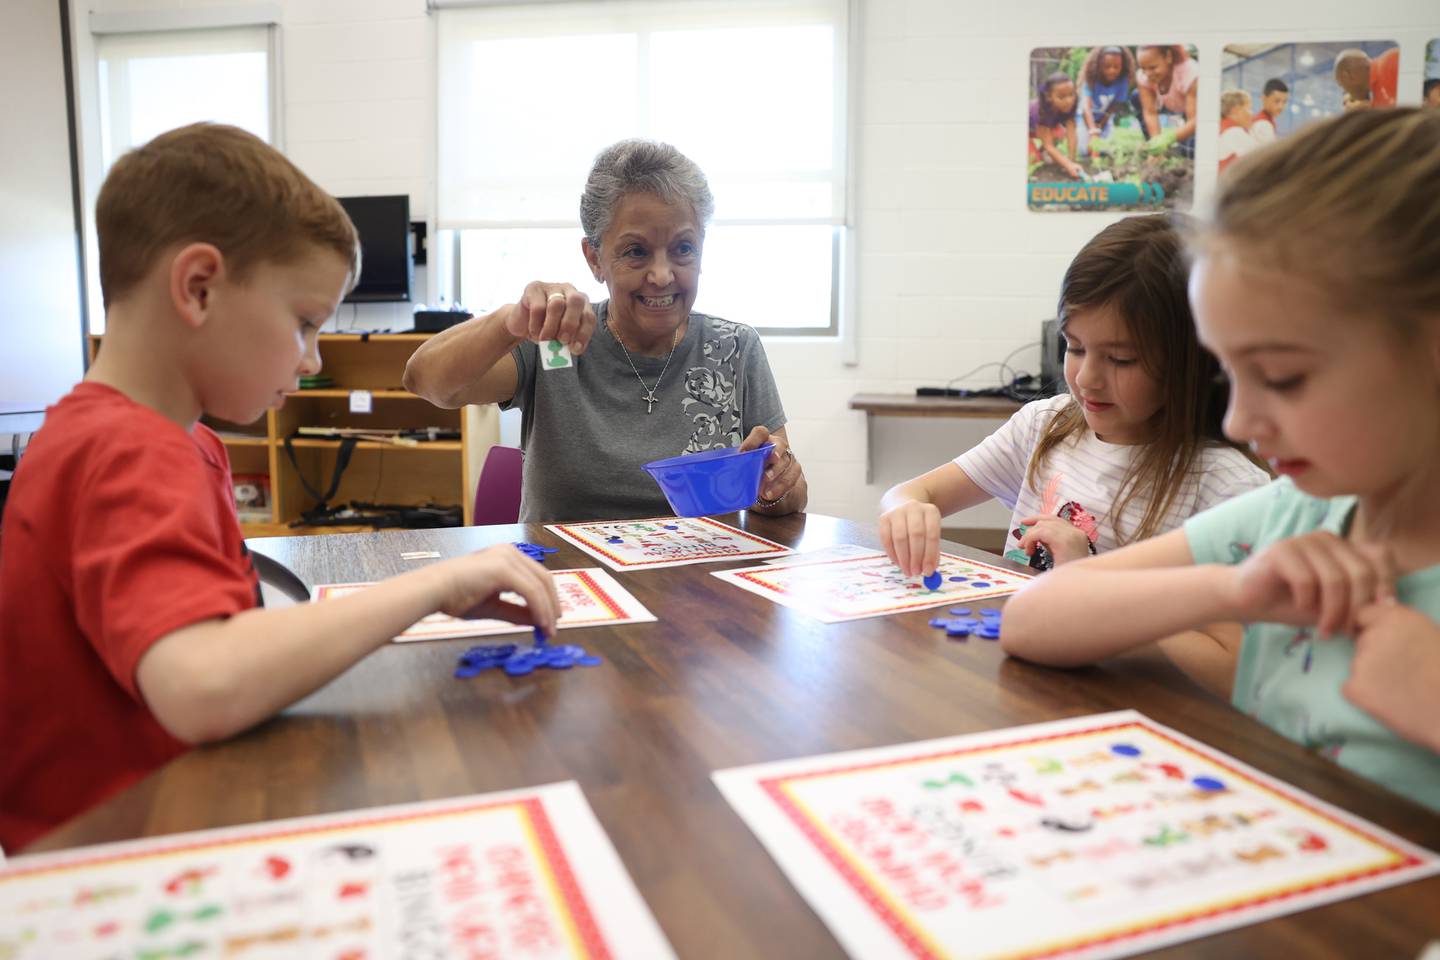 Volunteer Carmen Janega plays BINGO with the children at the C.W. Avery YMCA summer camp in Plainfield. Wednesday, July 20, 2022 in Plainfield.